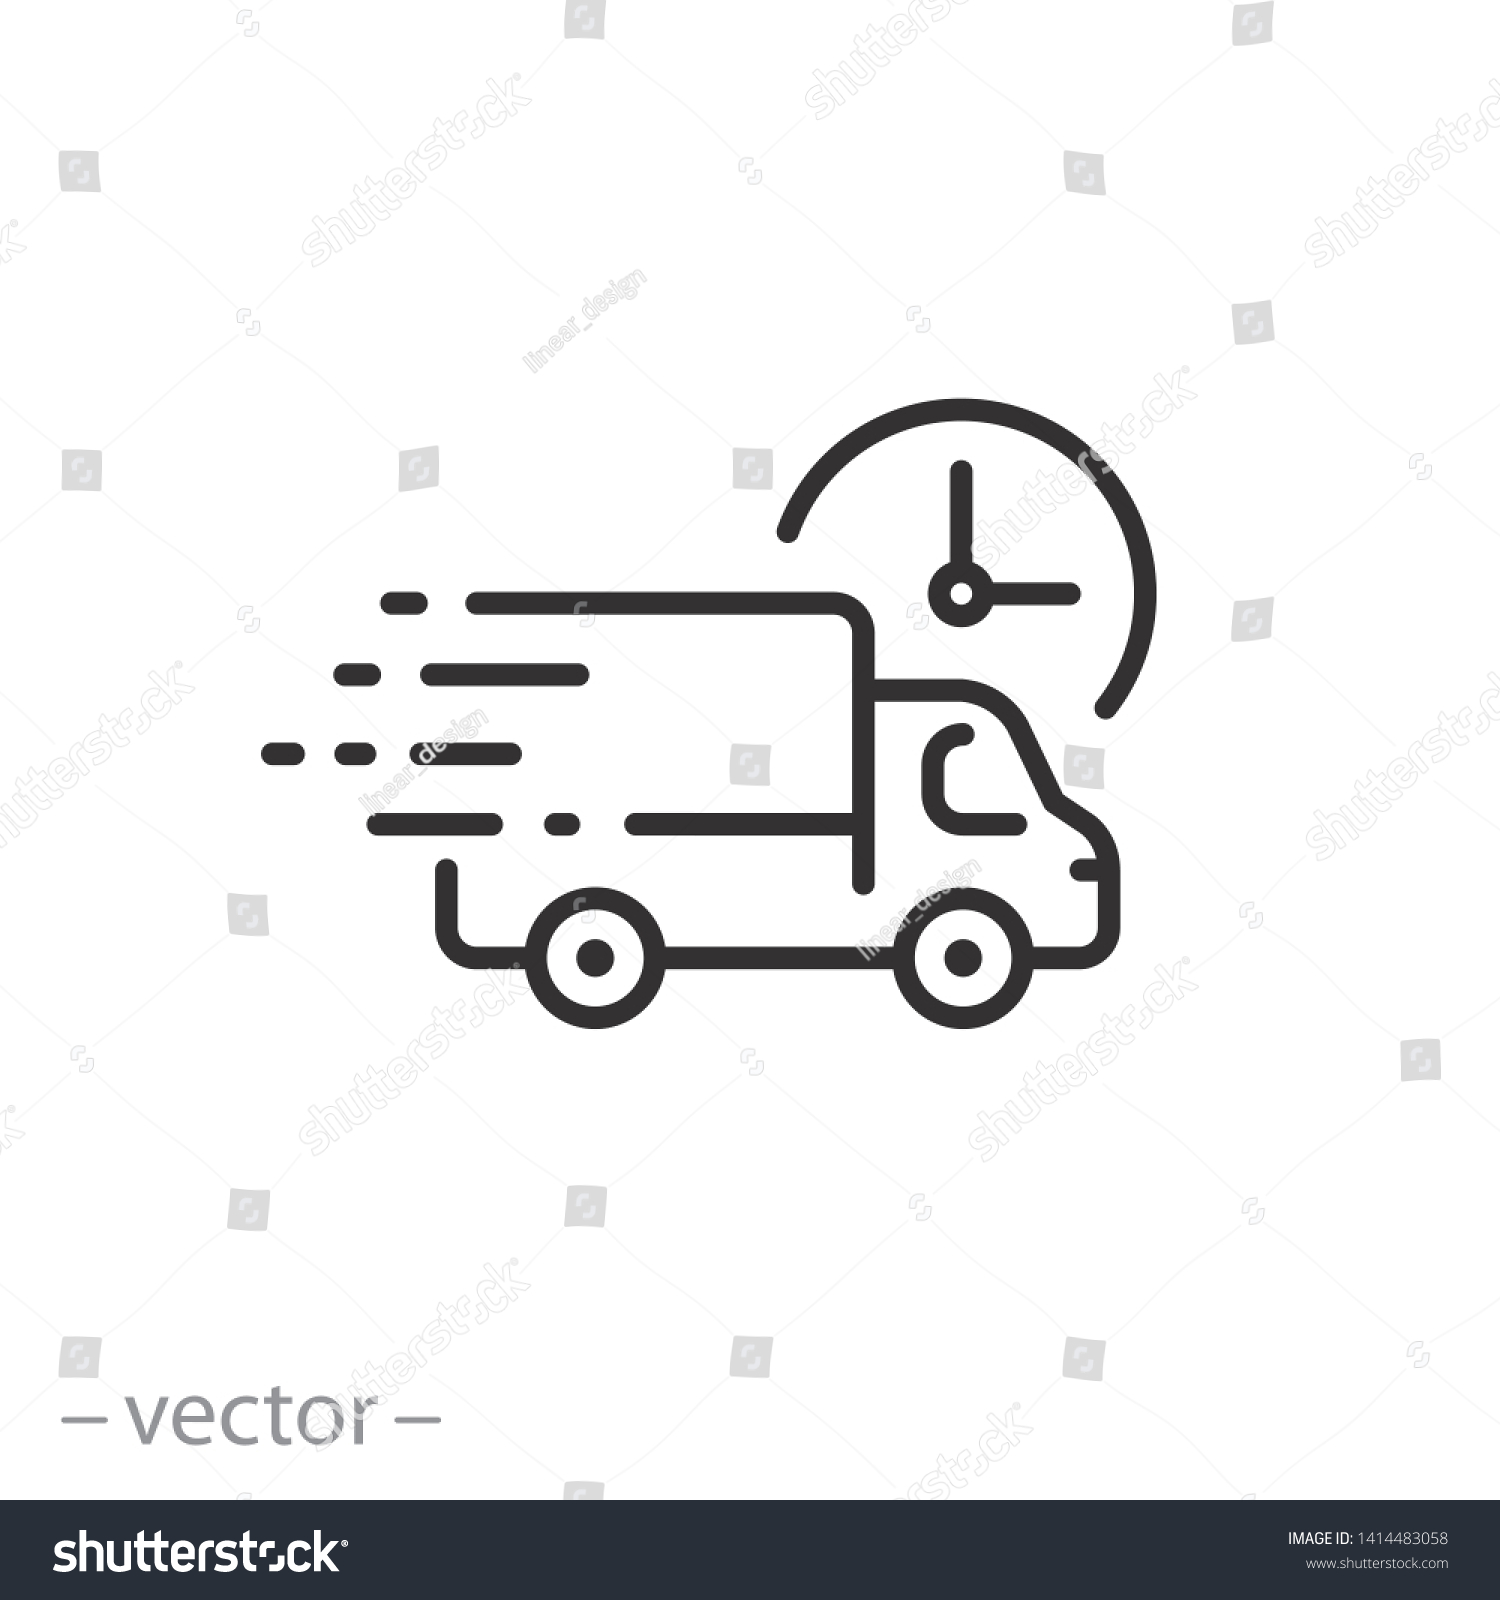 fast delivery truck icon, express delivery, quick move, line symbol on white background - editable stroke vector illustration eps10 #1414483058